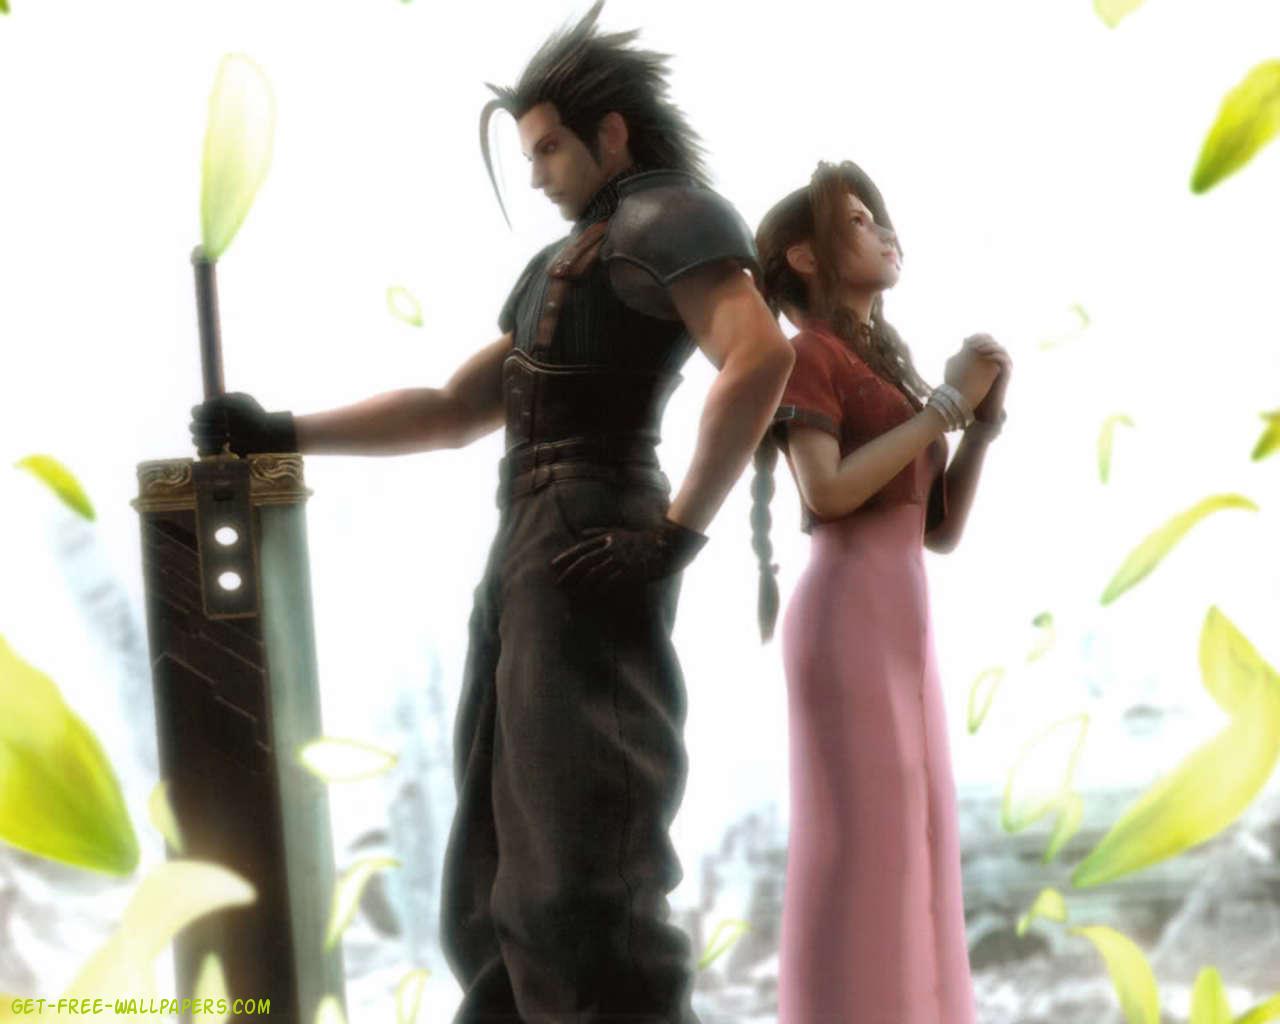 Aerith Final Fantasy 7 Remake Wallpapers  Wallpaper Cave